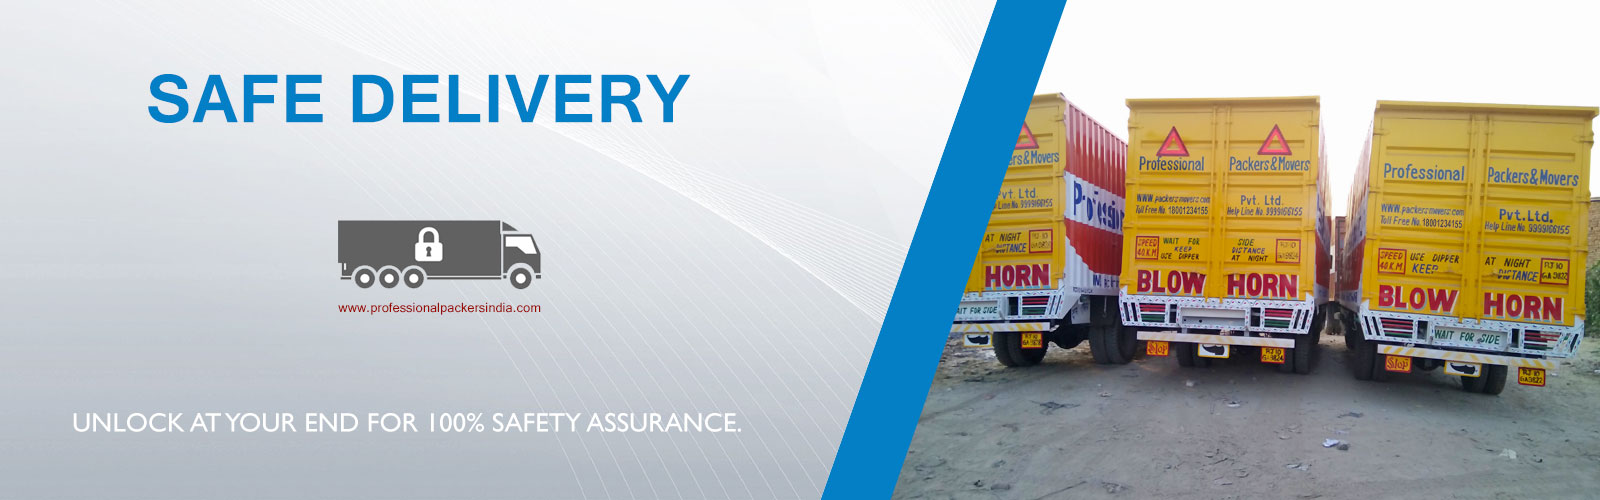 Movers Packers Bathinda Punjab company move your belongings fast and in an efficient manner by integrating top-notch packaging material, dedicated staff and global-class technology.